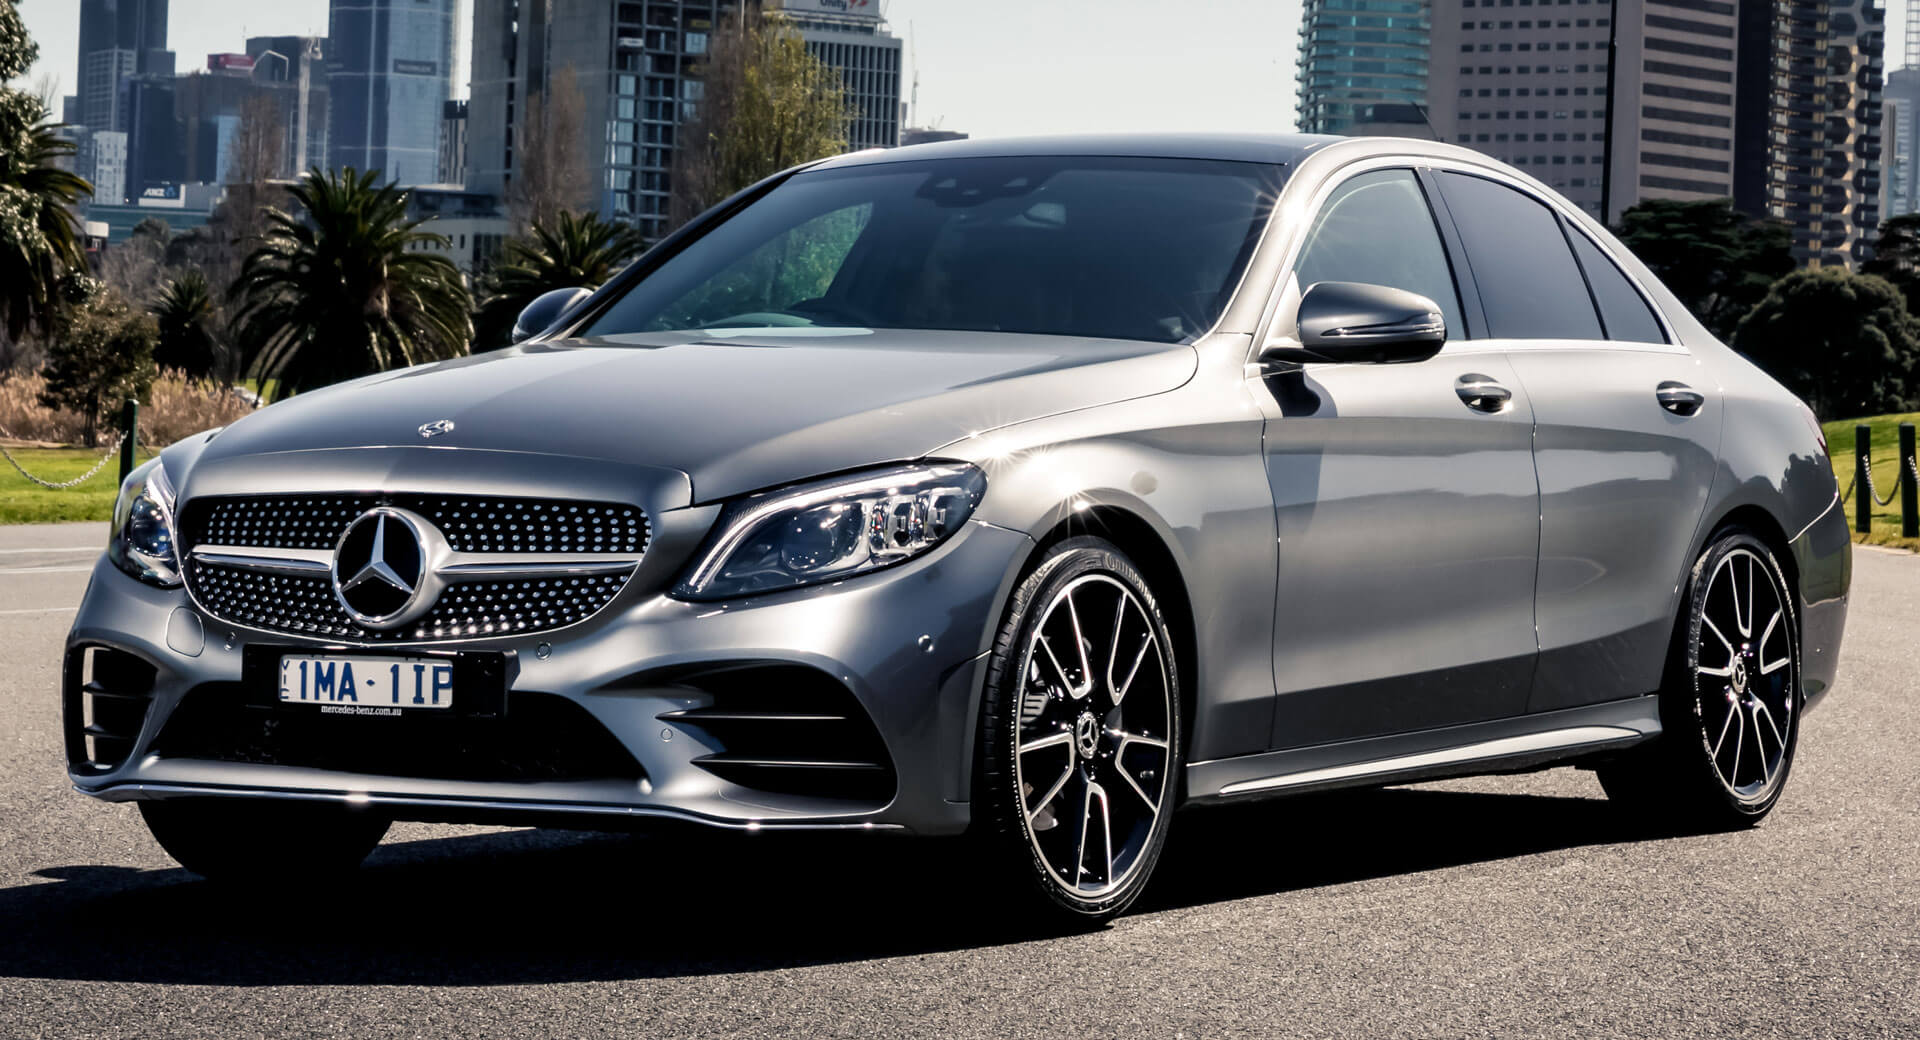 2020 Mercedes-Benz C300e PHEV And C200 Sport Edition Arrive In ...